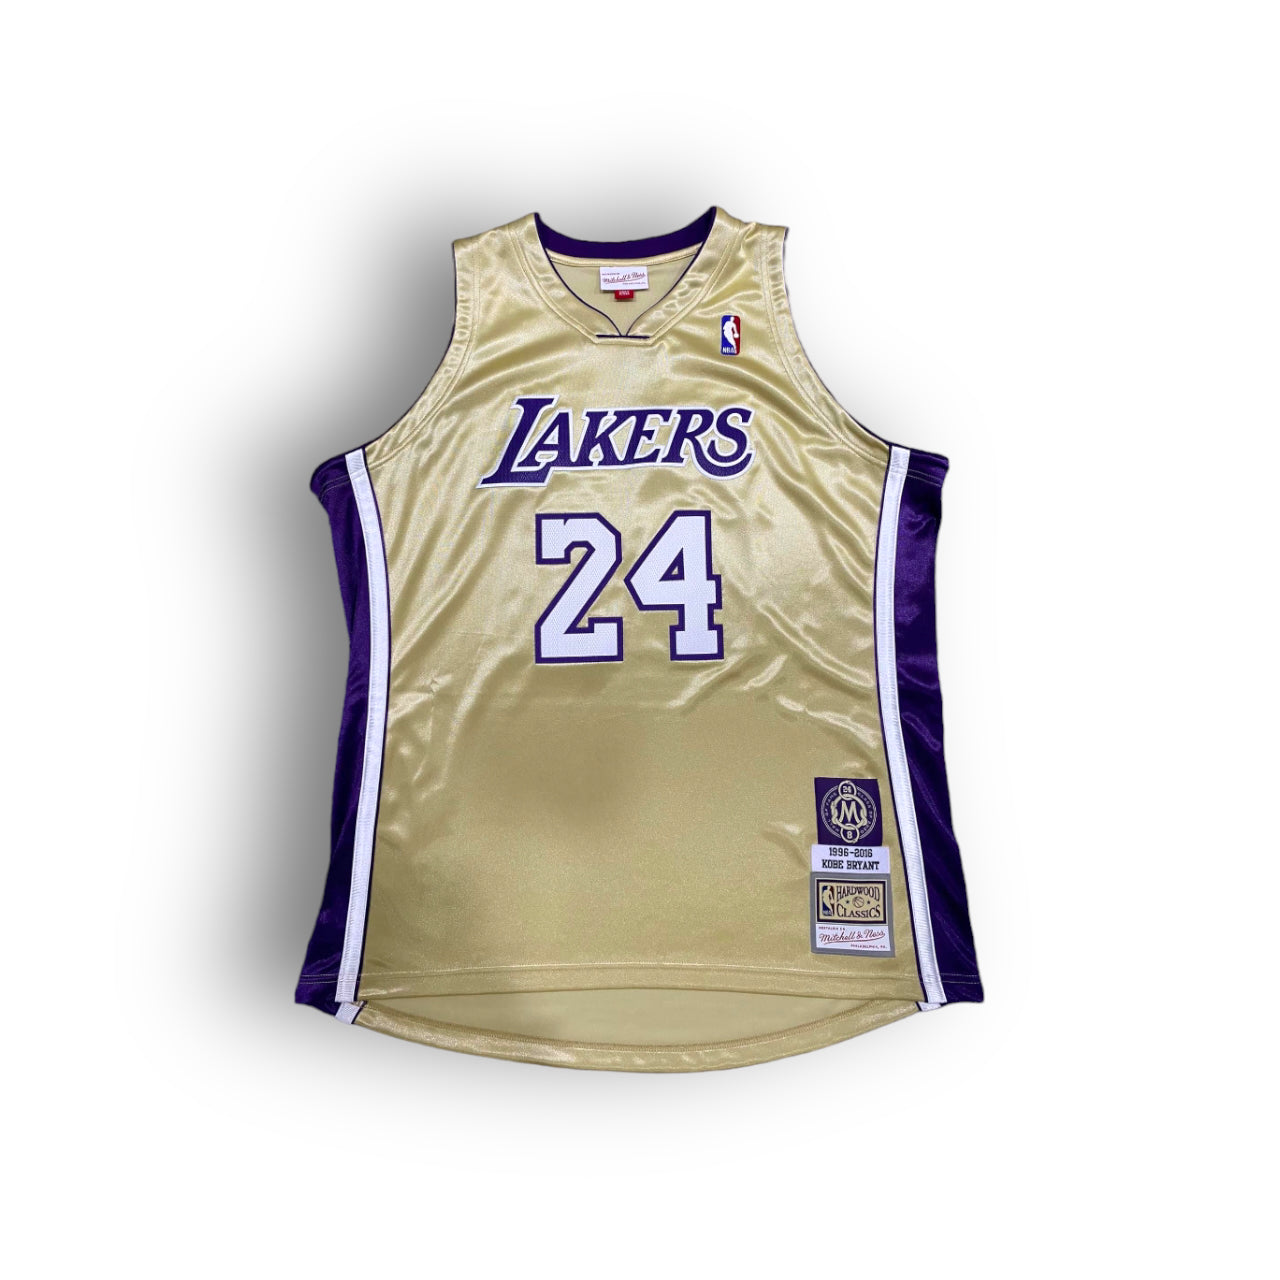 Mitchell and Ness Kobe Bryant Los Angeles Lakers Hall of Fame Edition feat. "Mamba Academy" Authentic Jersey - Gold #24 - Hoop Jersey Store